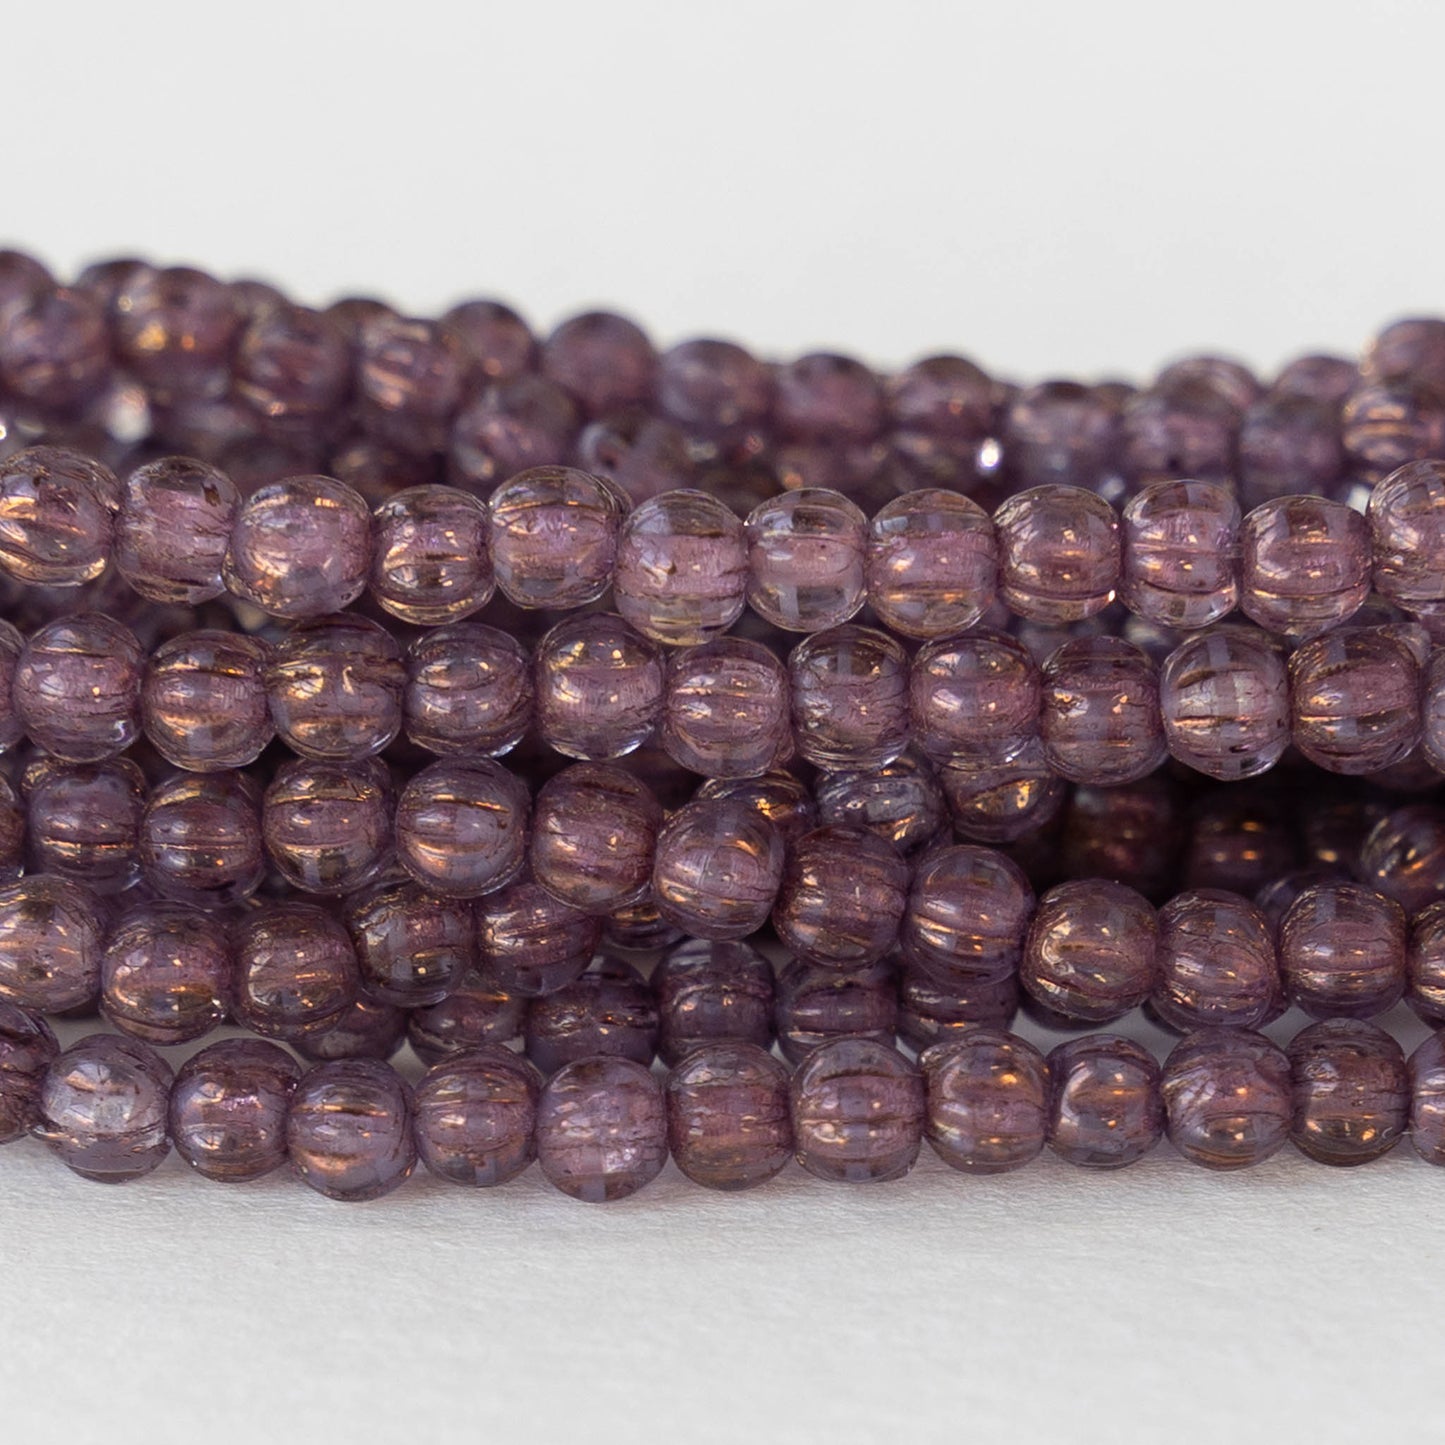 3mm Melon Bead - Violet with Gold Wash - 50 Beads